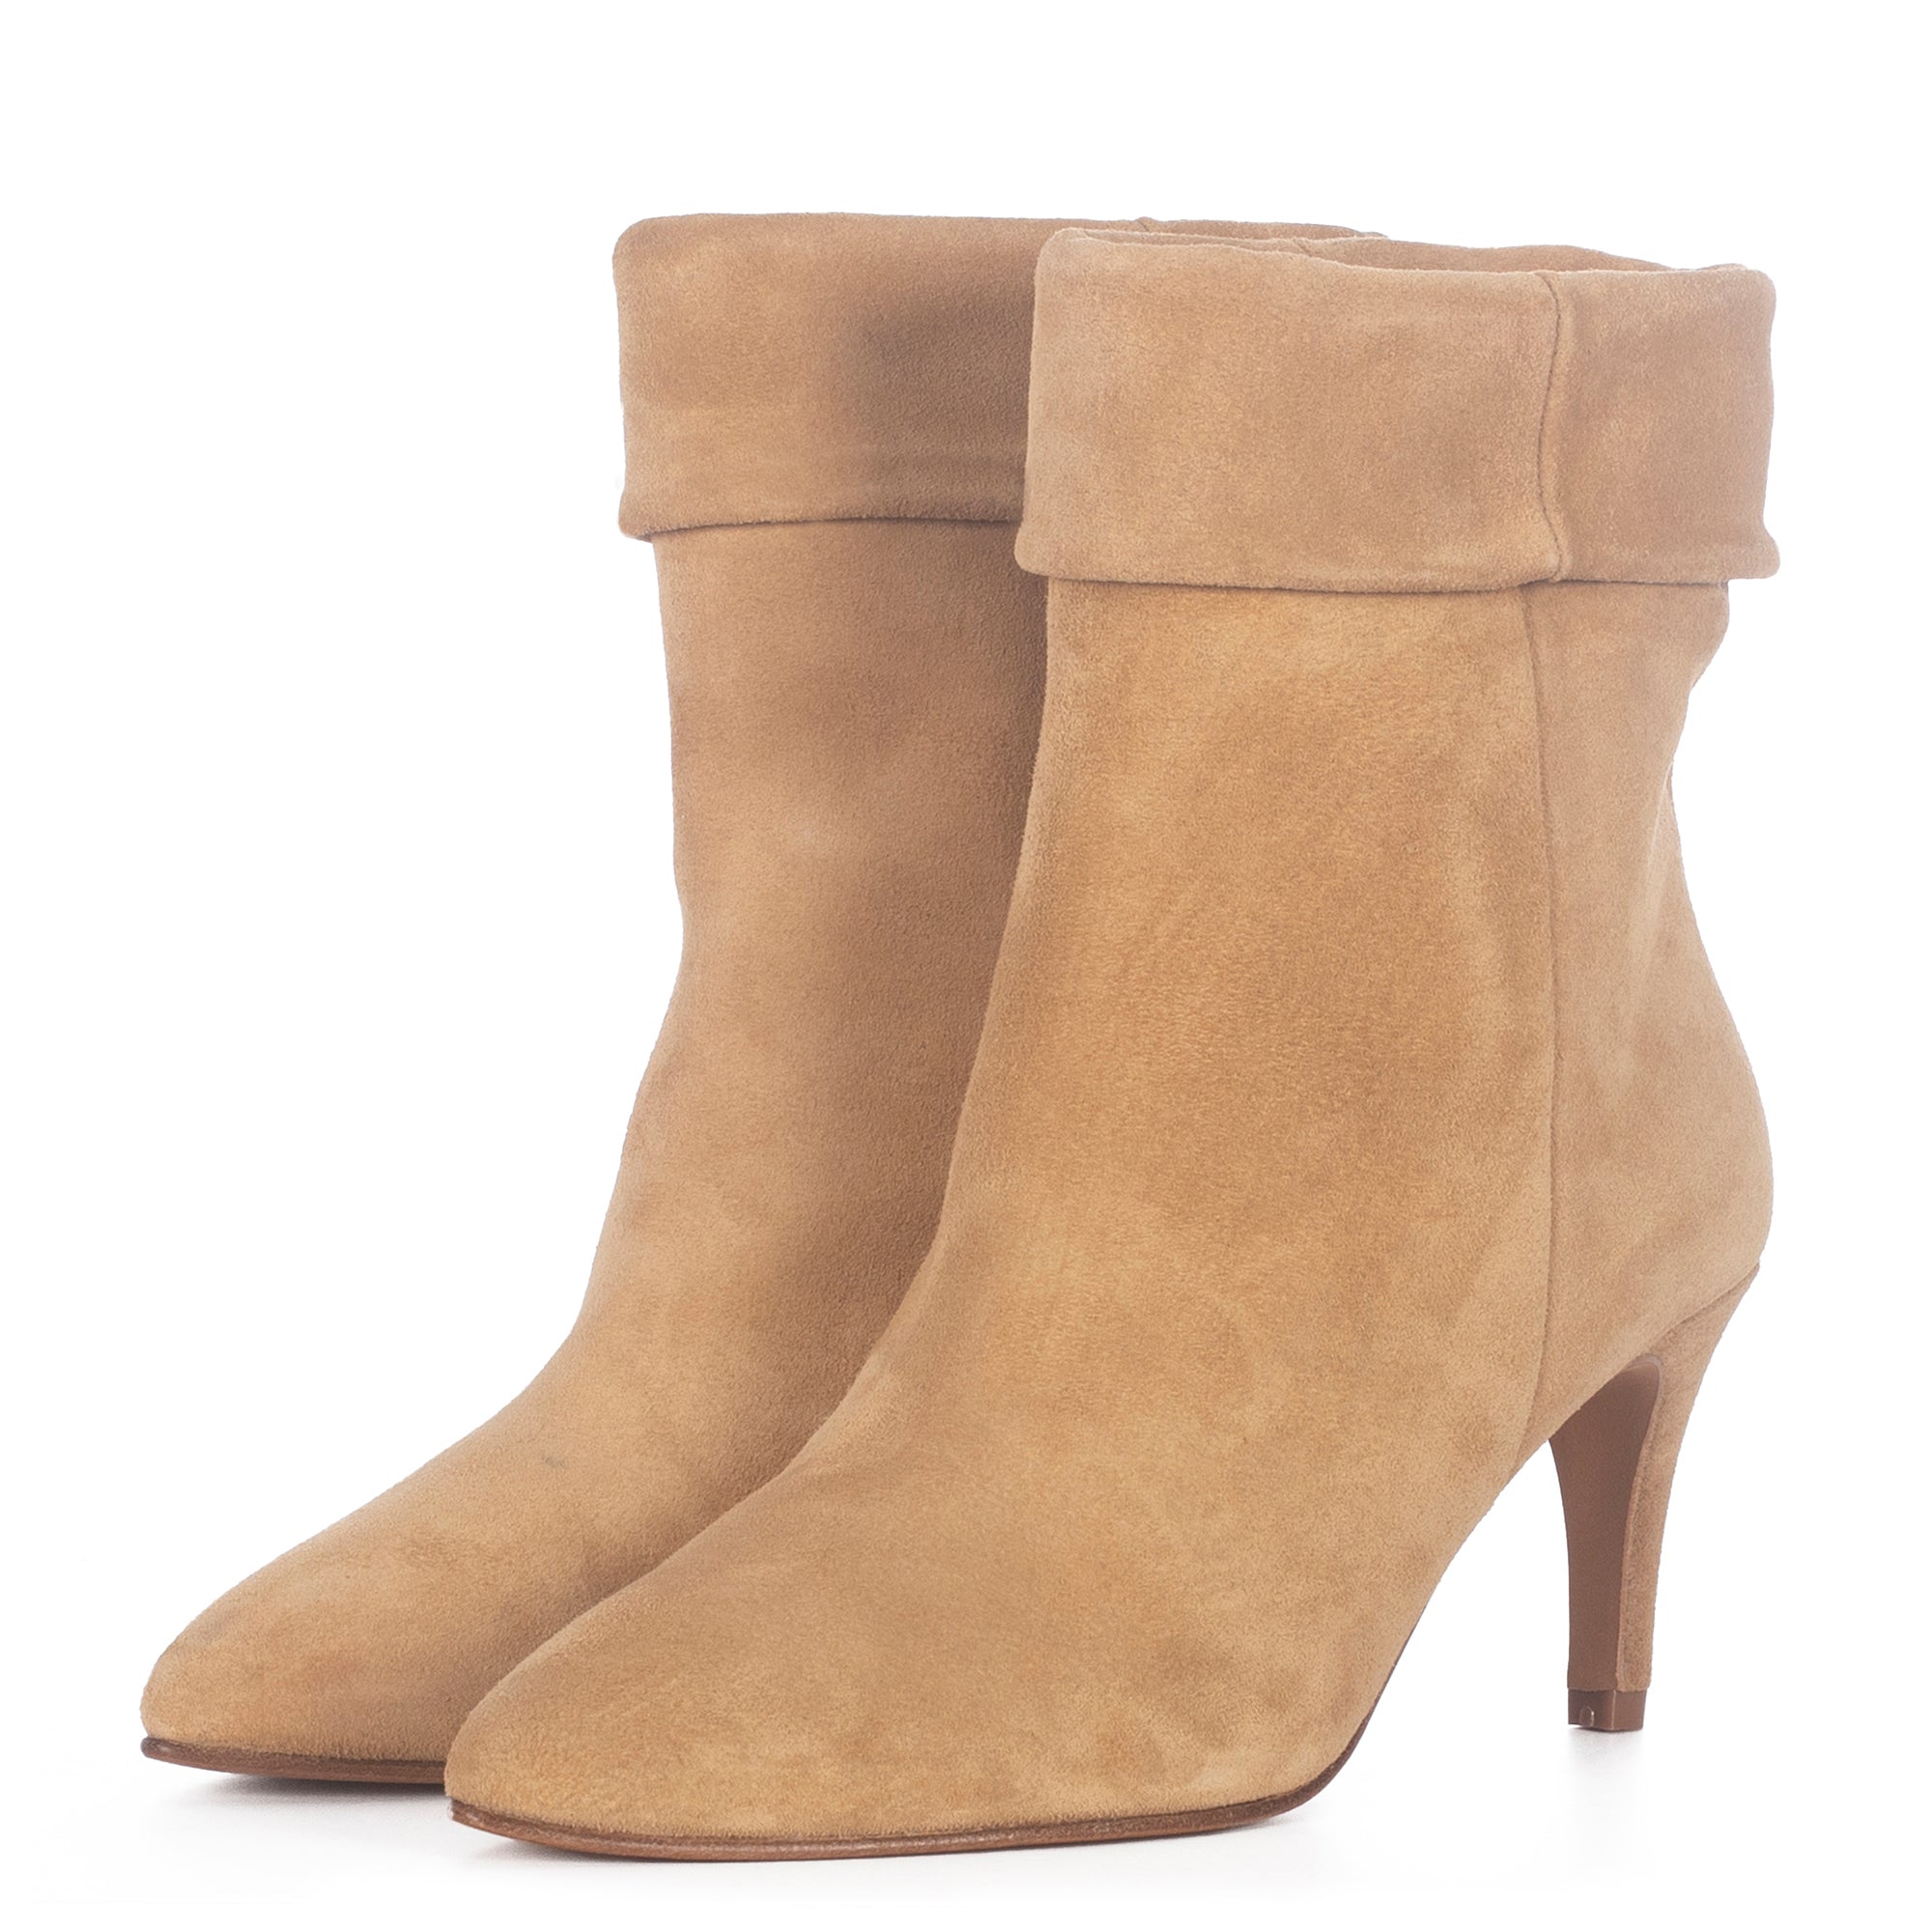 SAND SUEDE ANKLE BOOTS